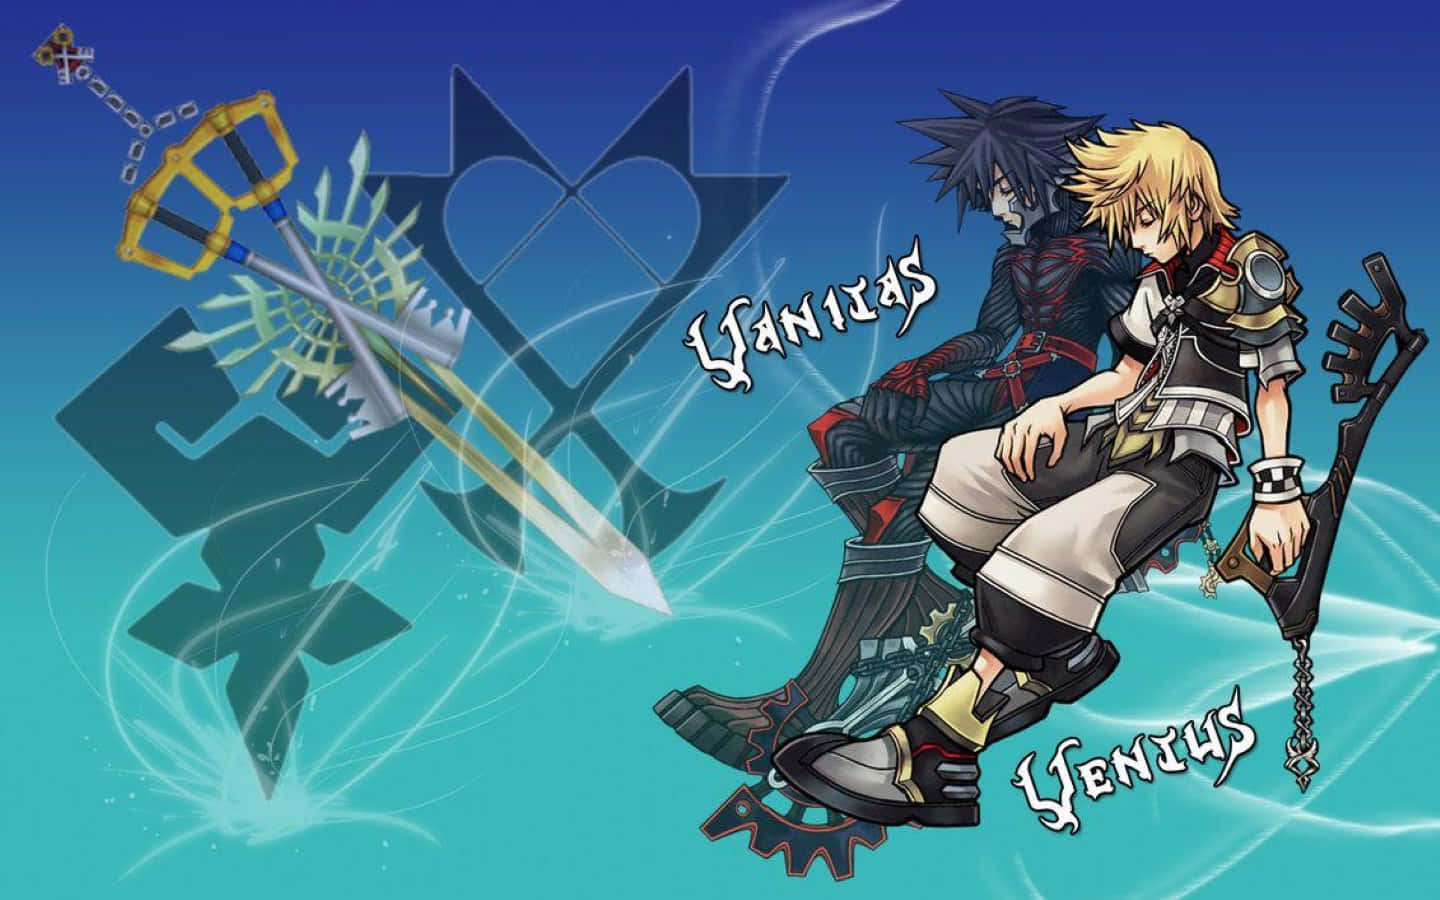 Ventus from Kingdom Hearts unleashes his power in an epic battle Wallpaper